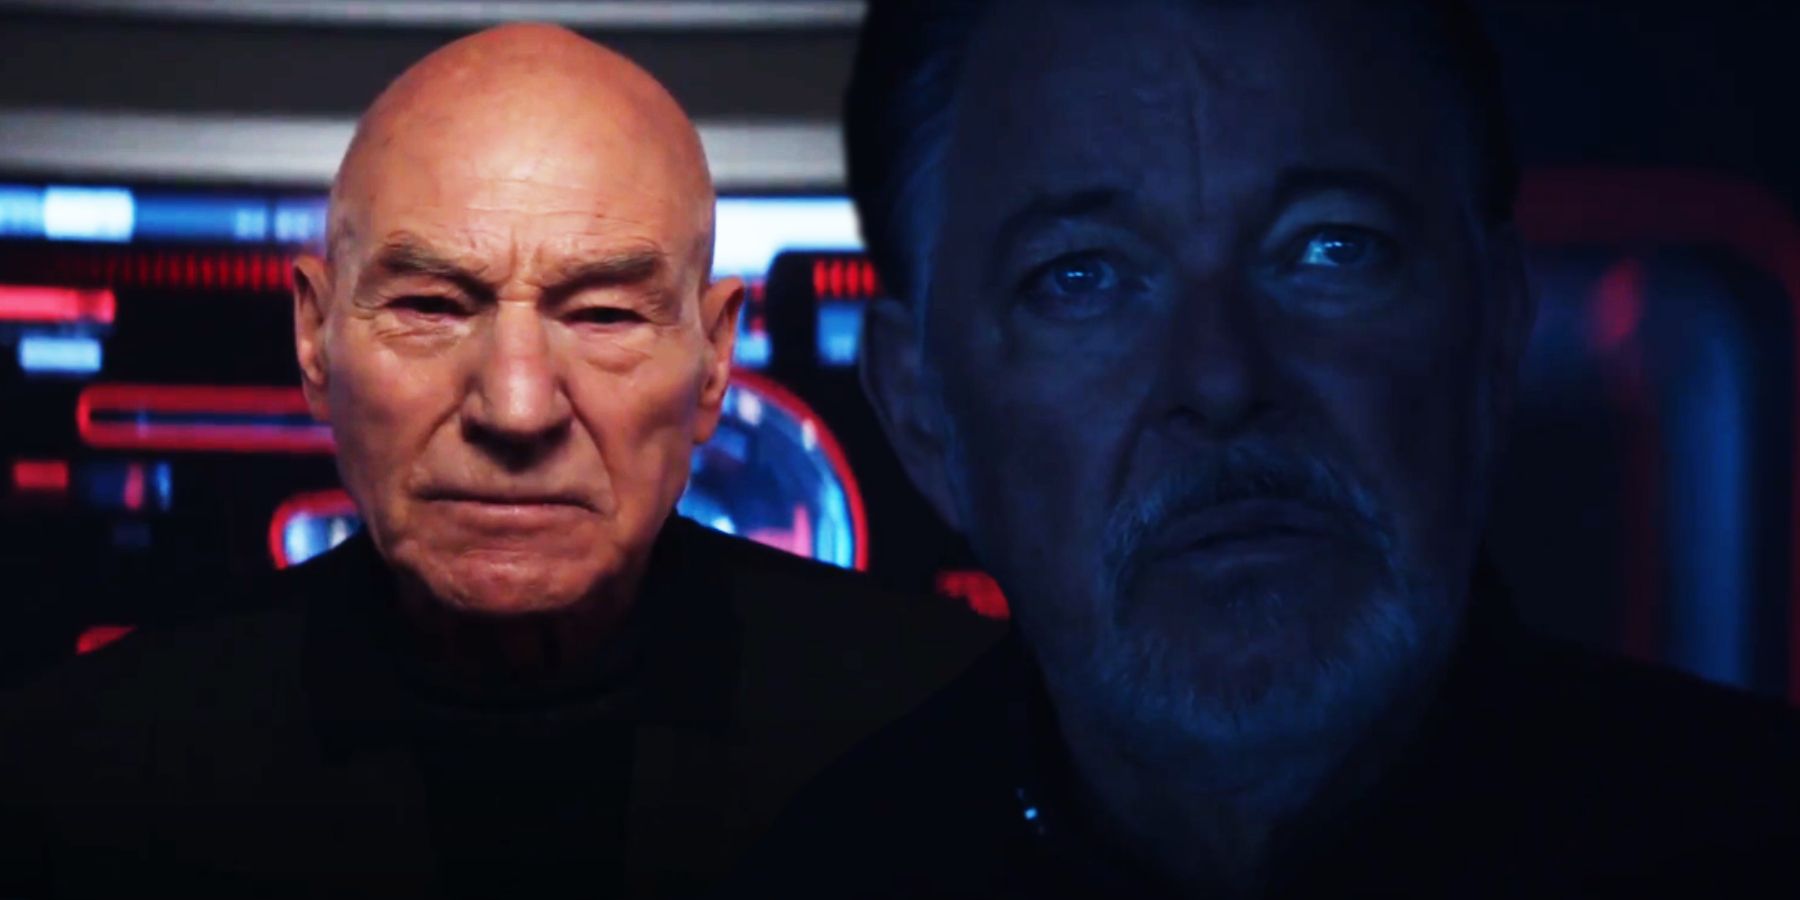 Patrick Stewart and Jonathan Frakes as Jean-Luc Picard and Will Riker in Picard season 3